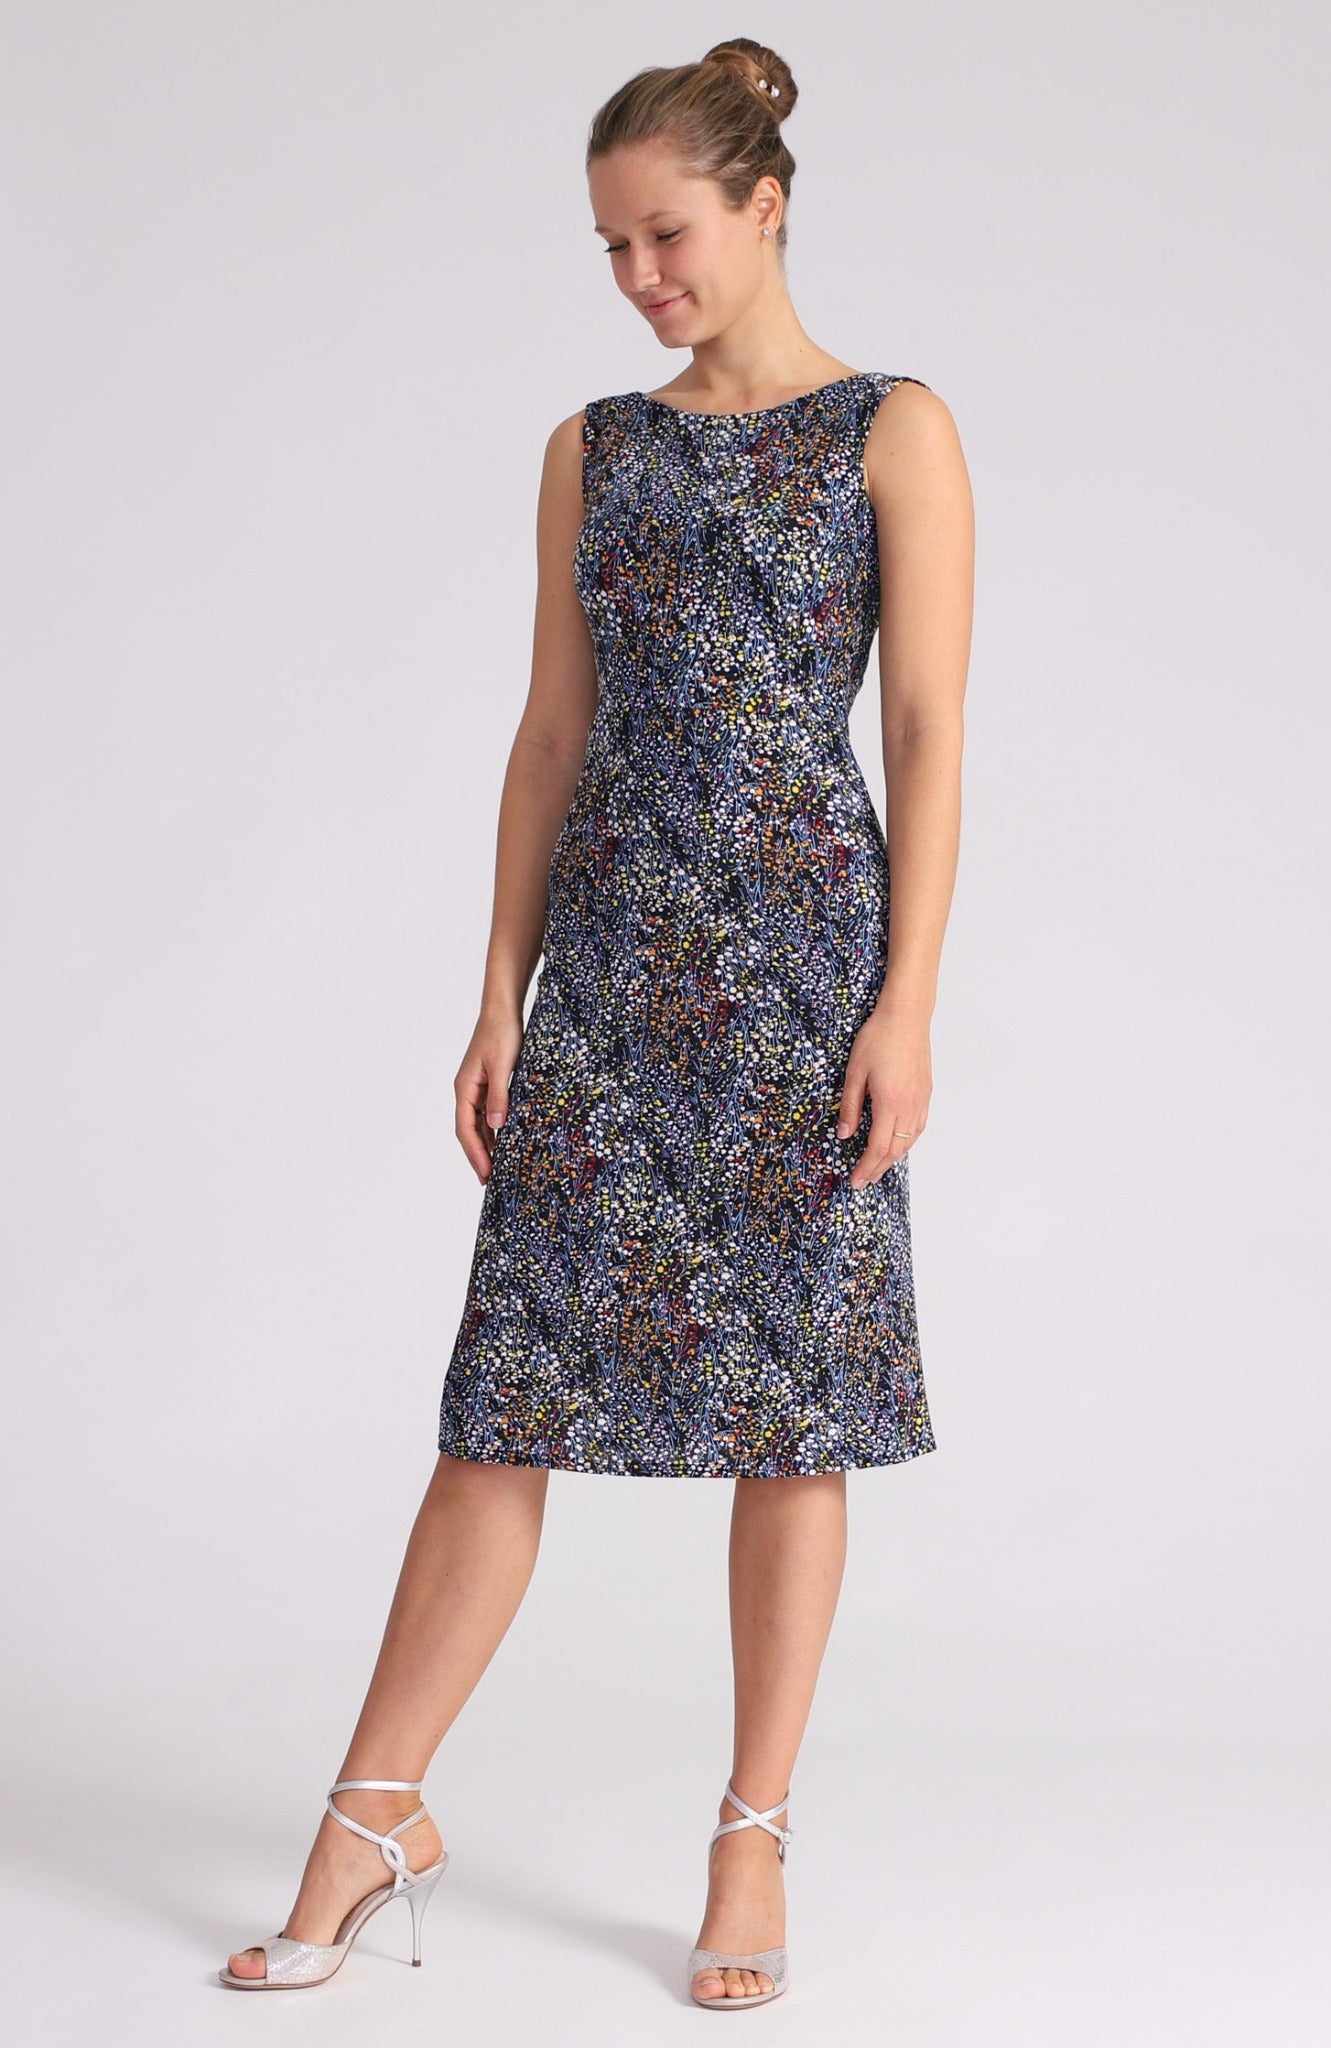 OLIVIA - Tango Dress in Dotted Flowers with Elegant Lace Detail